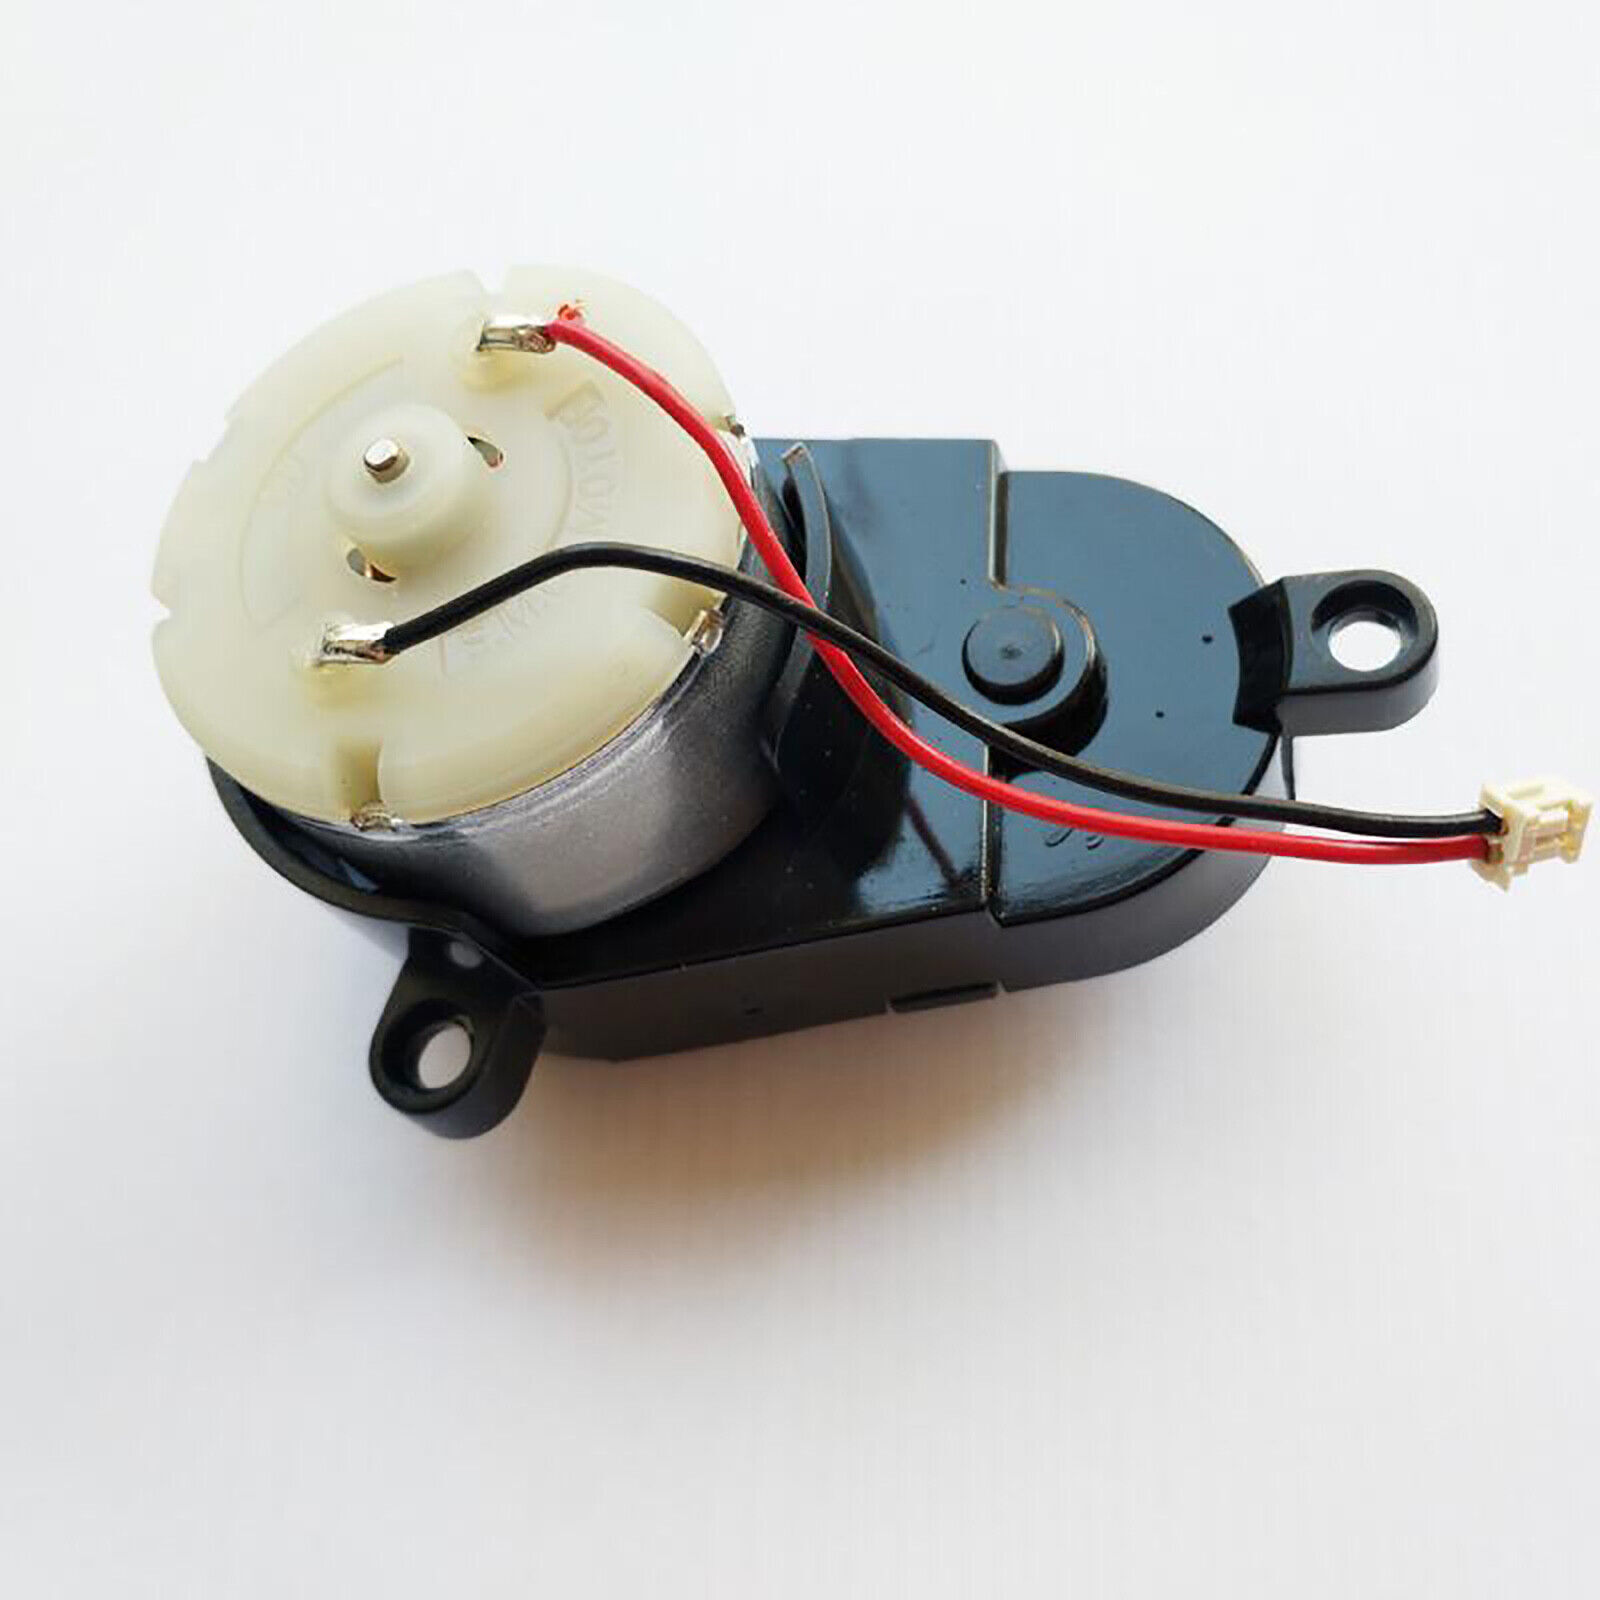 Brush motor for ECOVACS DN620 621 DH35 45 43 DS625 sweeper vacuum cleaner Condition New Marke Markenlos Markenkompatibi - Click Image to Close